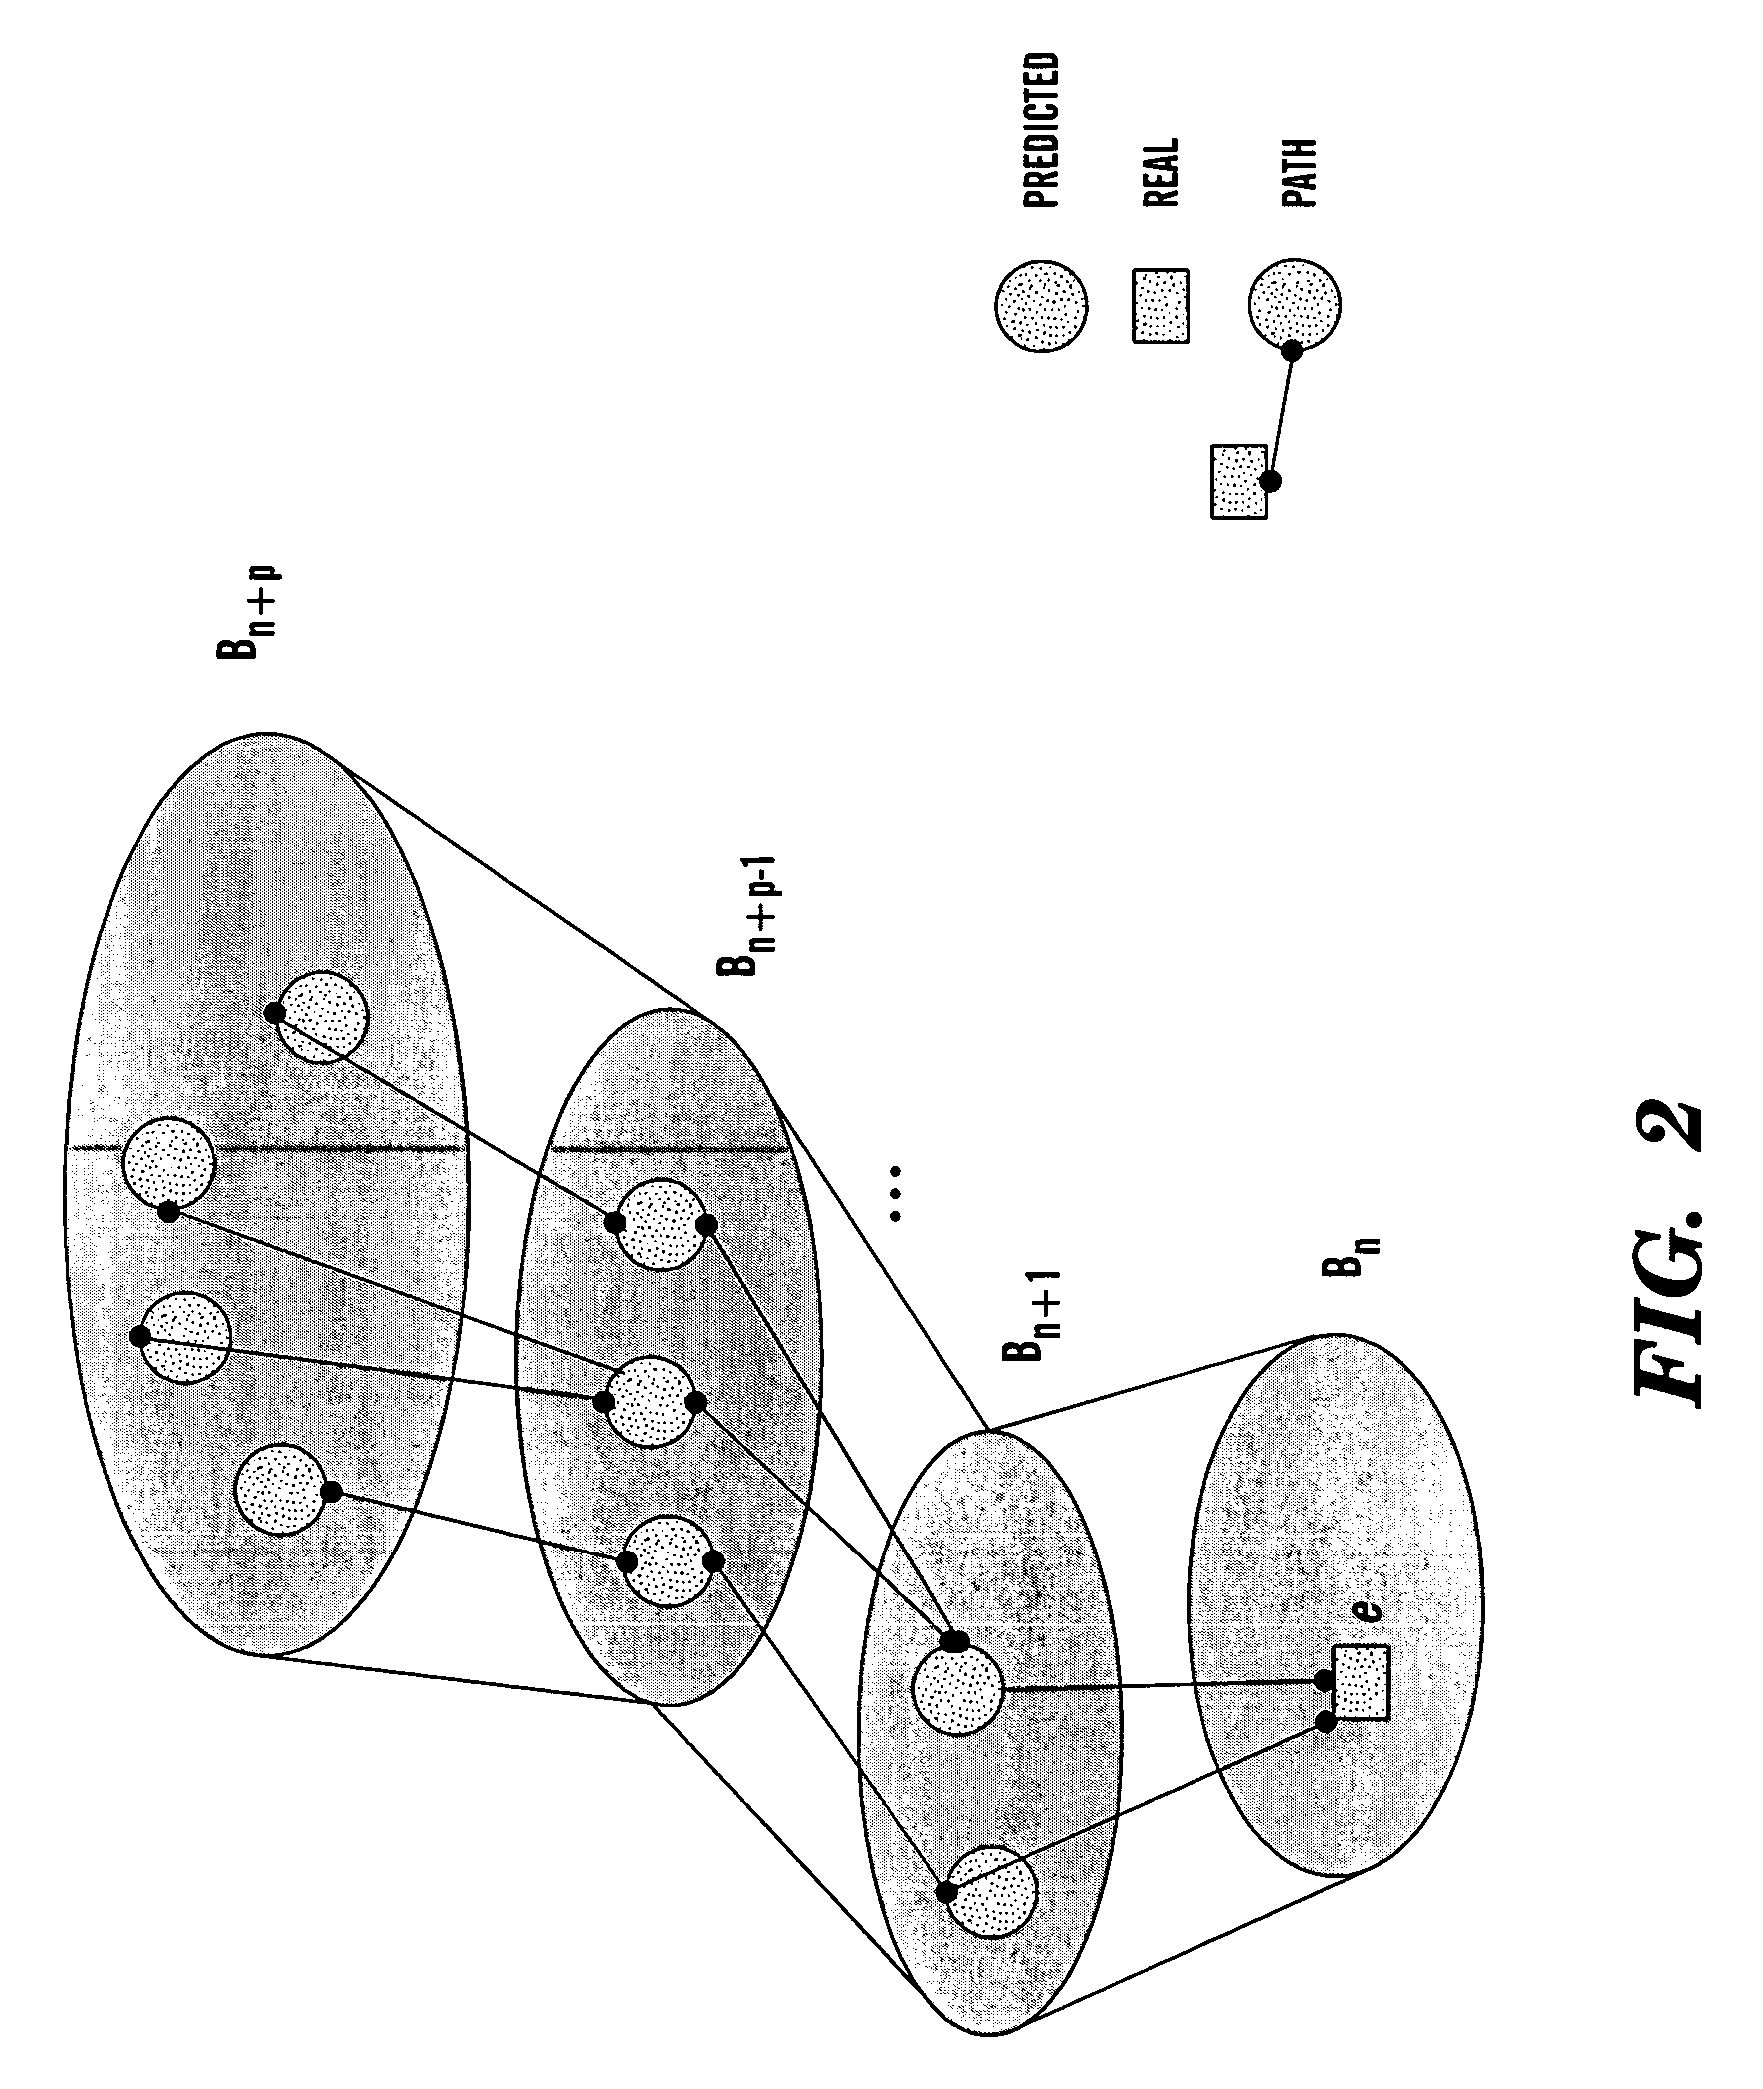 Method and system for associating events